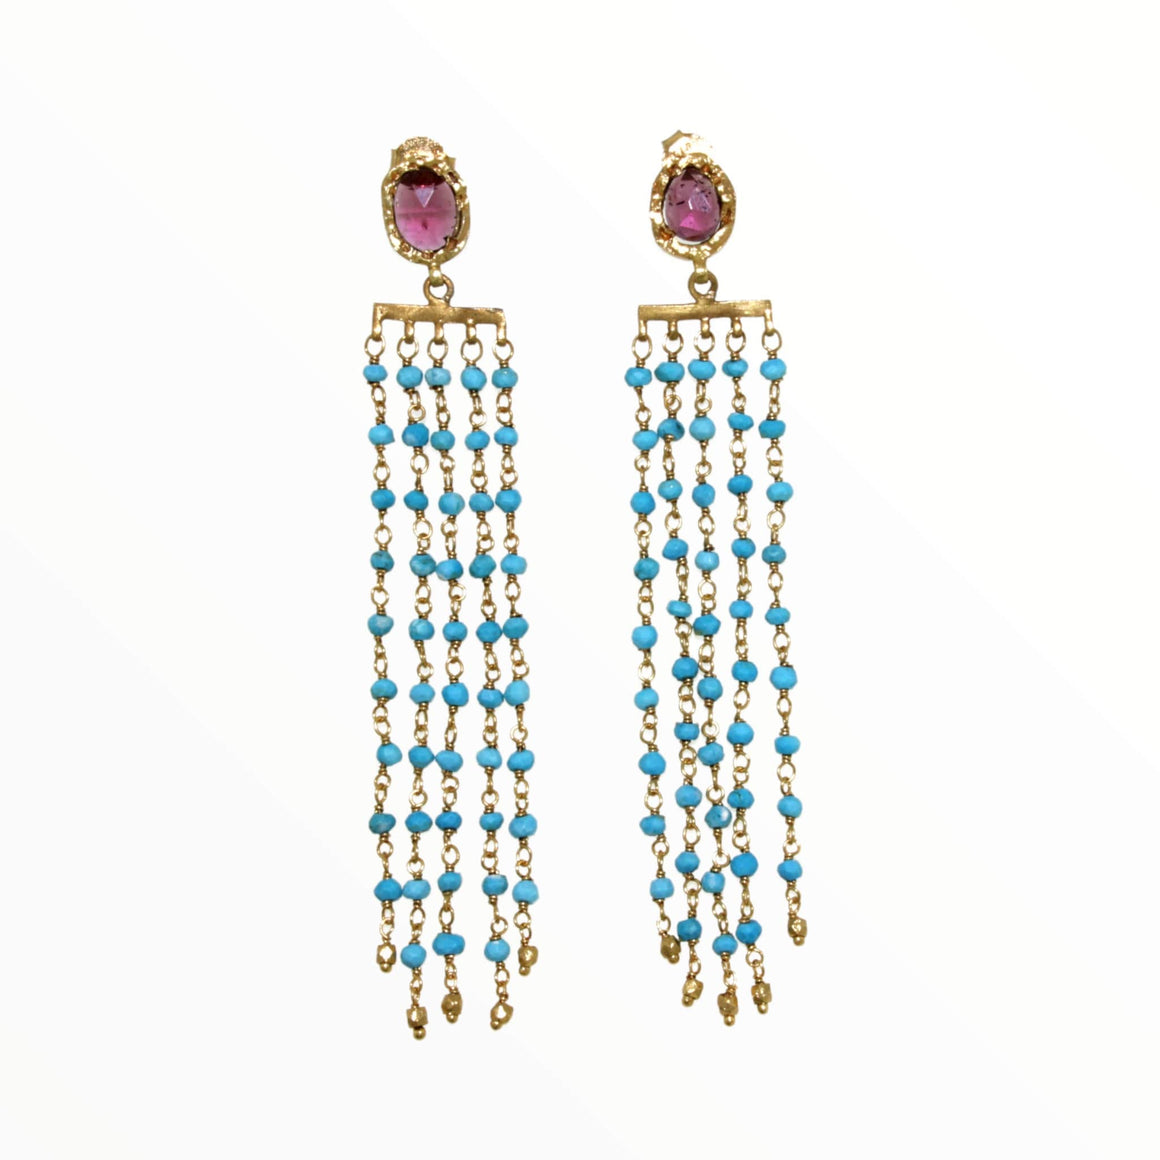 Peacock Tassel Earrings with Garnet and Turquoise